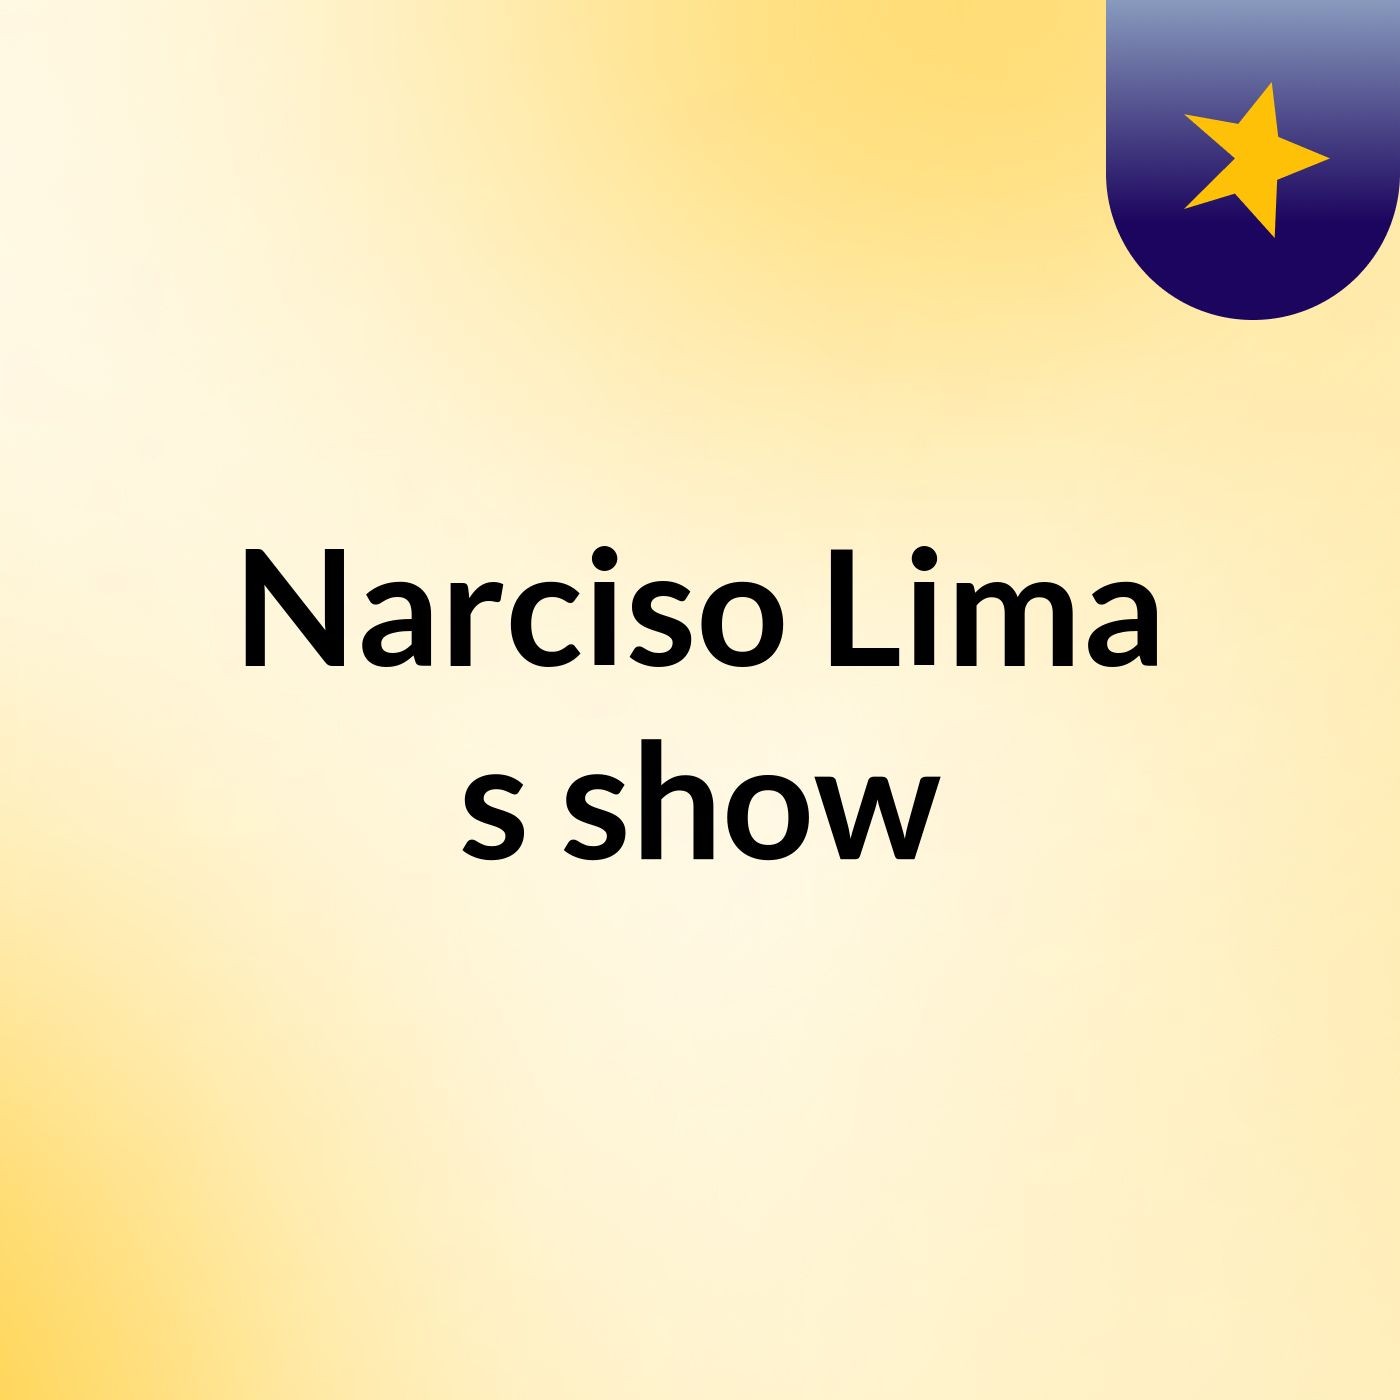 Narciso Lima's show